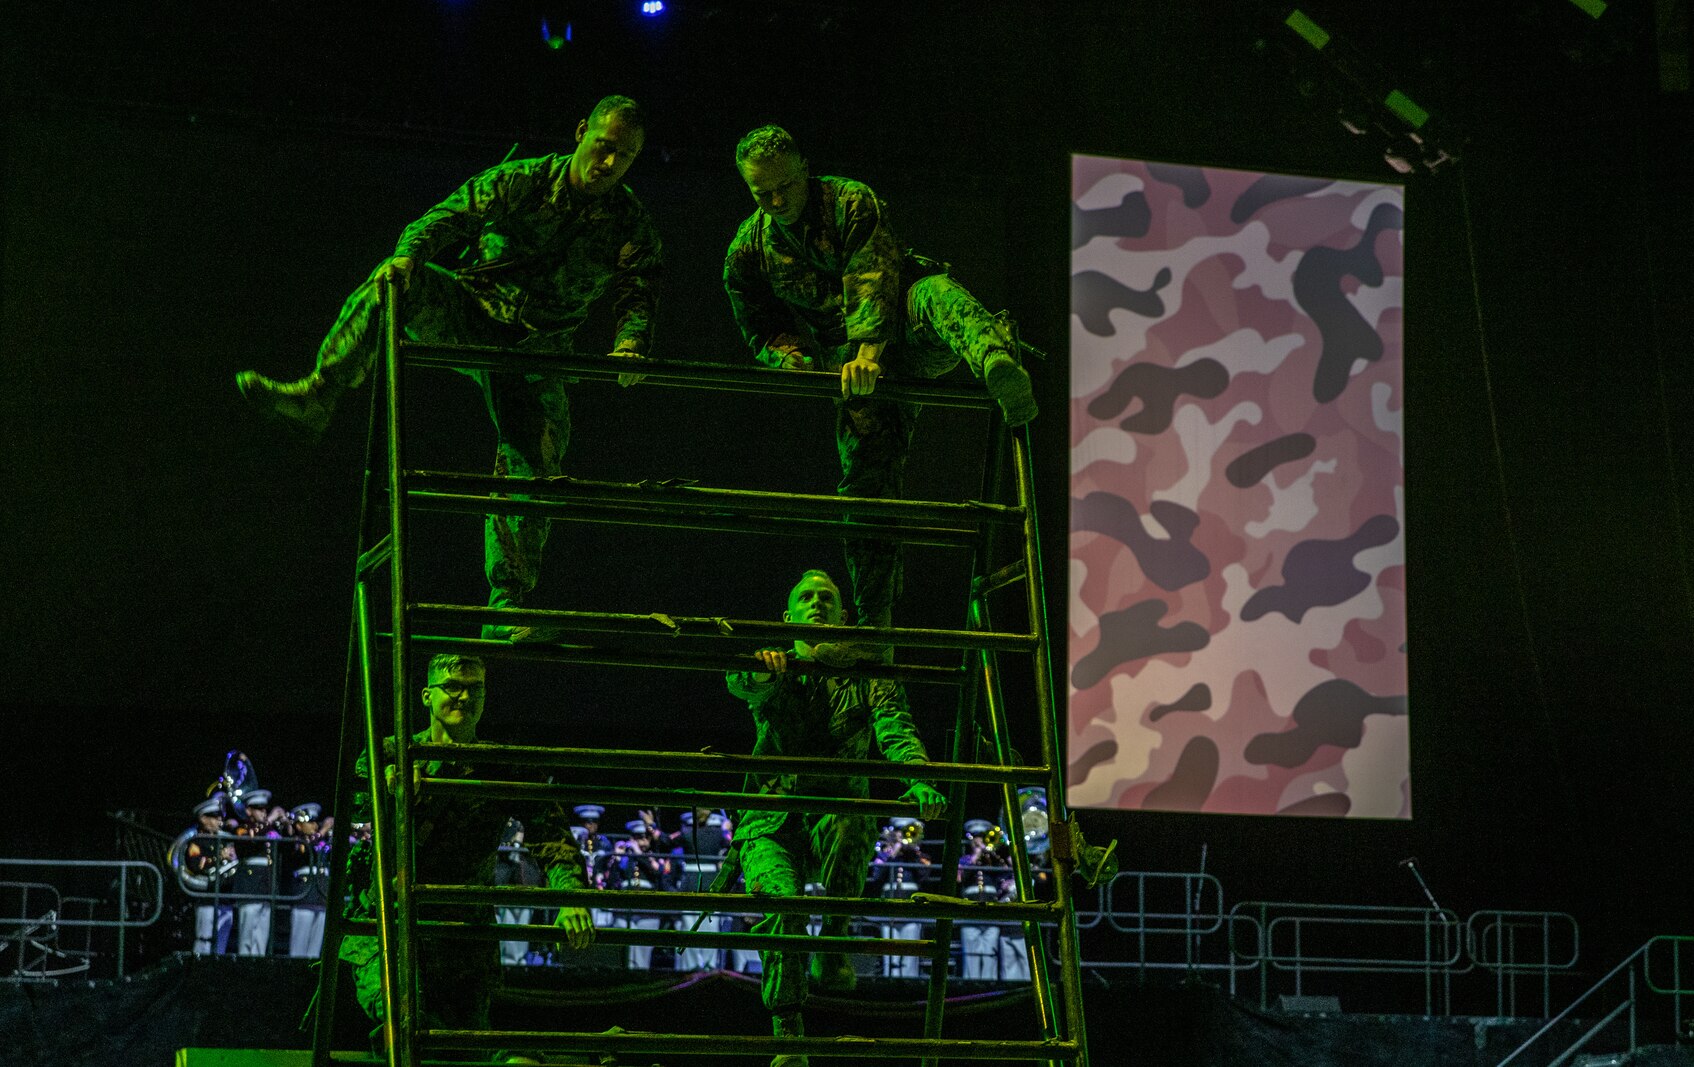 U.S. Marines with Marine Corps Security Force Regiment, Naval Weapons Station, Yorktown, Virginia, complete a simulated obstacle course during the Virginia International Tattoo in Norfolk, Virginia, April 19, 2023. The Virginia International Tattoo is an annual military music and arts festival featuring performances by military bands, drill teams, dancers, and artists from around the world. The event creates a sense of camaraderie and mutual respect among the participants, who come from different branches of the military and different countries, but share a common commitment to service and sacrifice. (U.S. Marine Corps Photo by Lance Cpl. Kayla LeClaire)